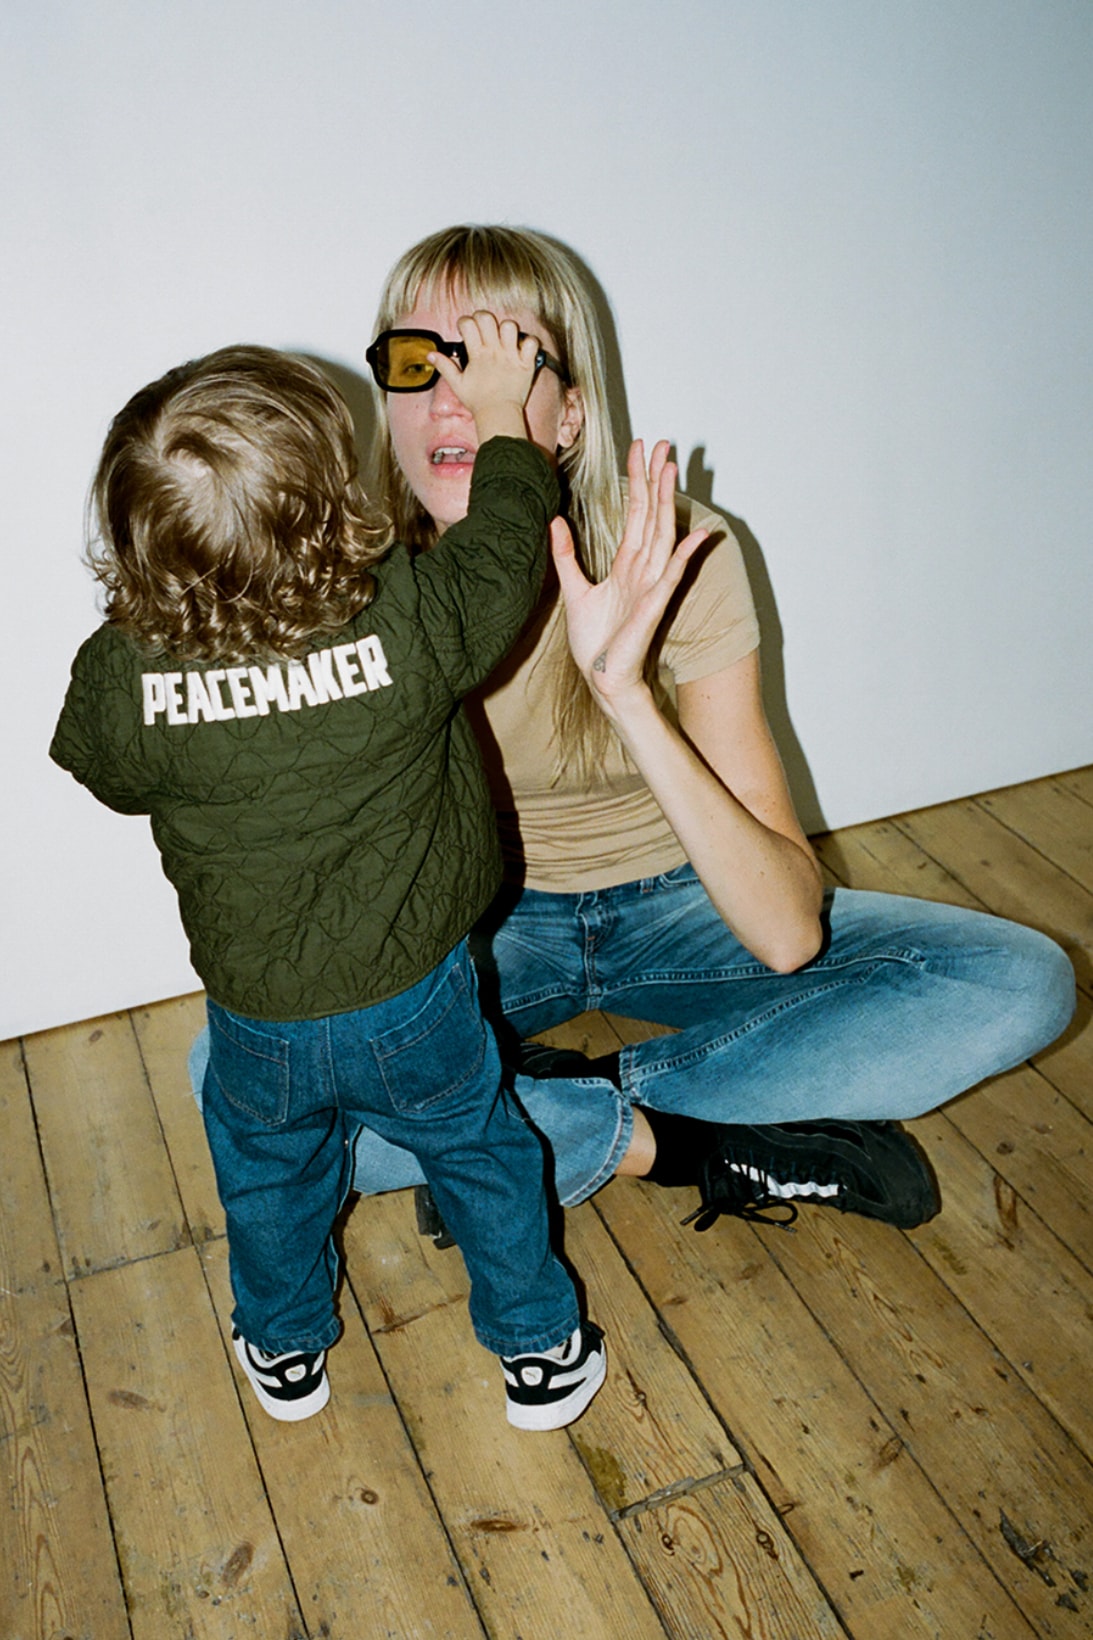 OAMC Releases Limited Edition Baby Peacemaker Liner Jacket